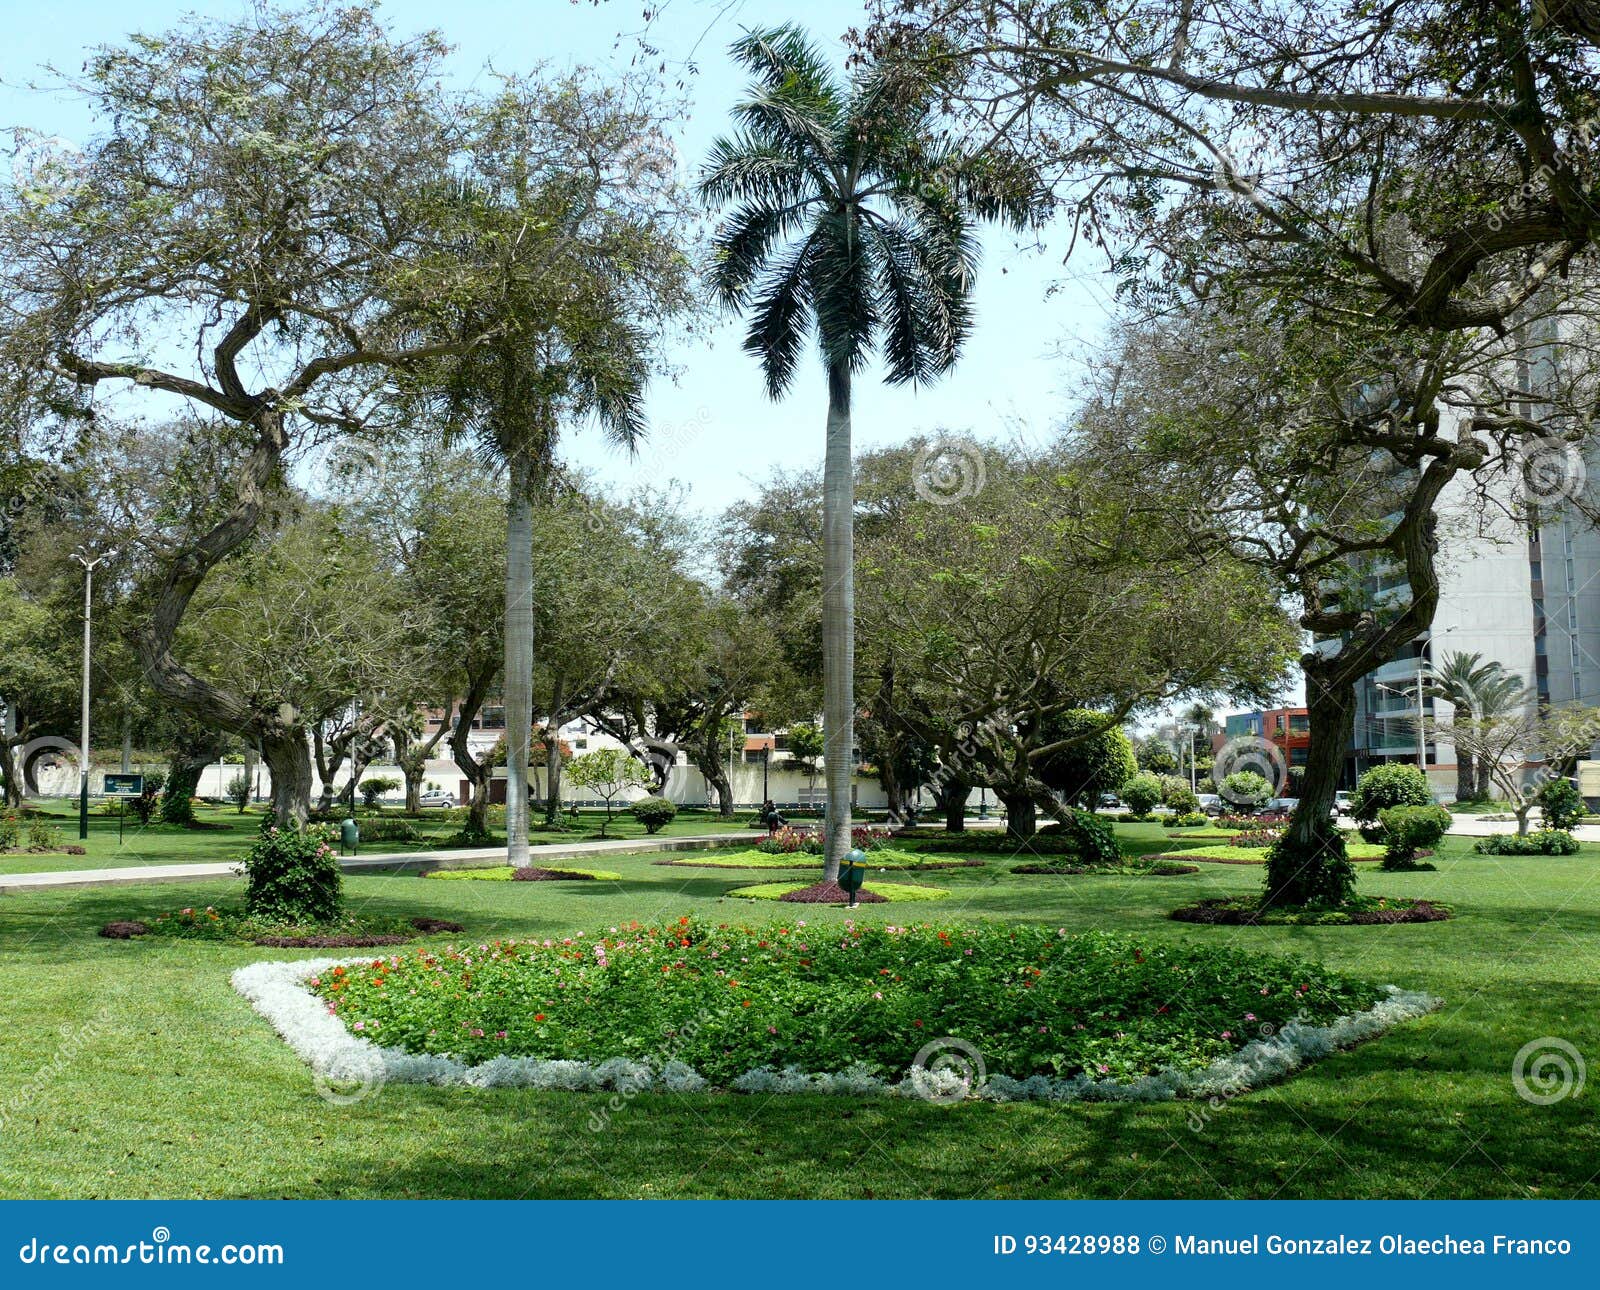 alfonso ugarte park in san isidro district of lima.